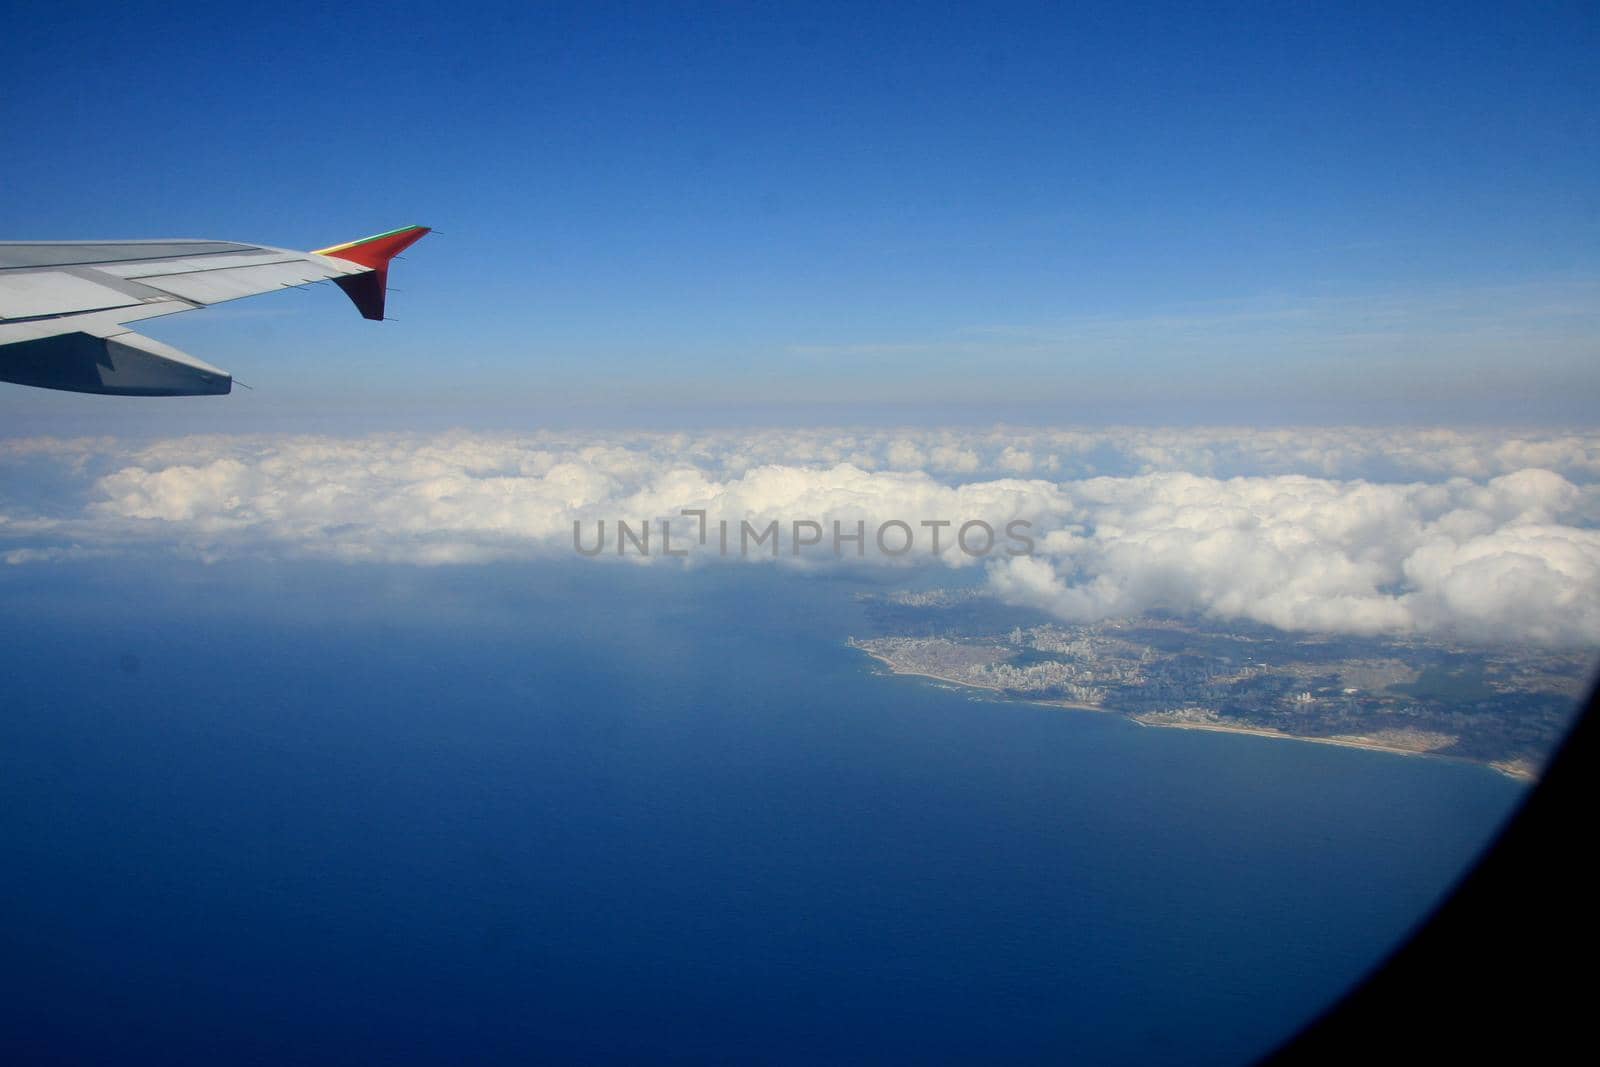 salvador, bahia / brazil - april 24, 2008: view from an airplane window during flight in the city of Salvador.